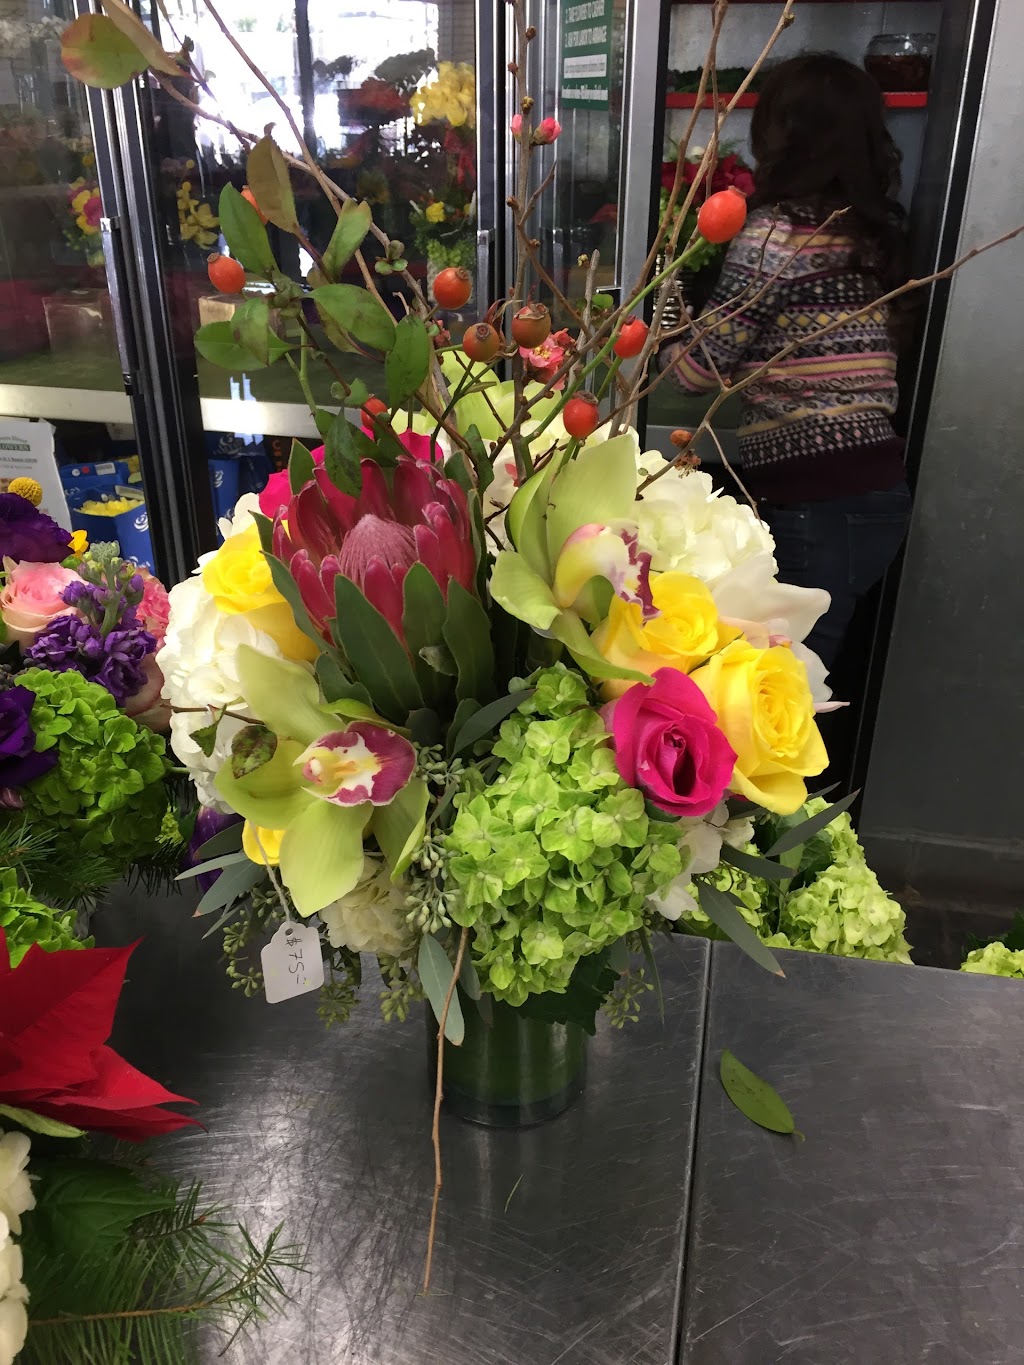 Growers Direct Flowers Inc | 155 W First St, Tustin, CA 92780, USA | Phone: (714) 368-9845